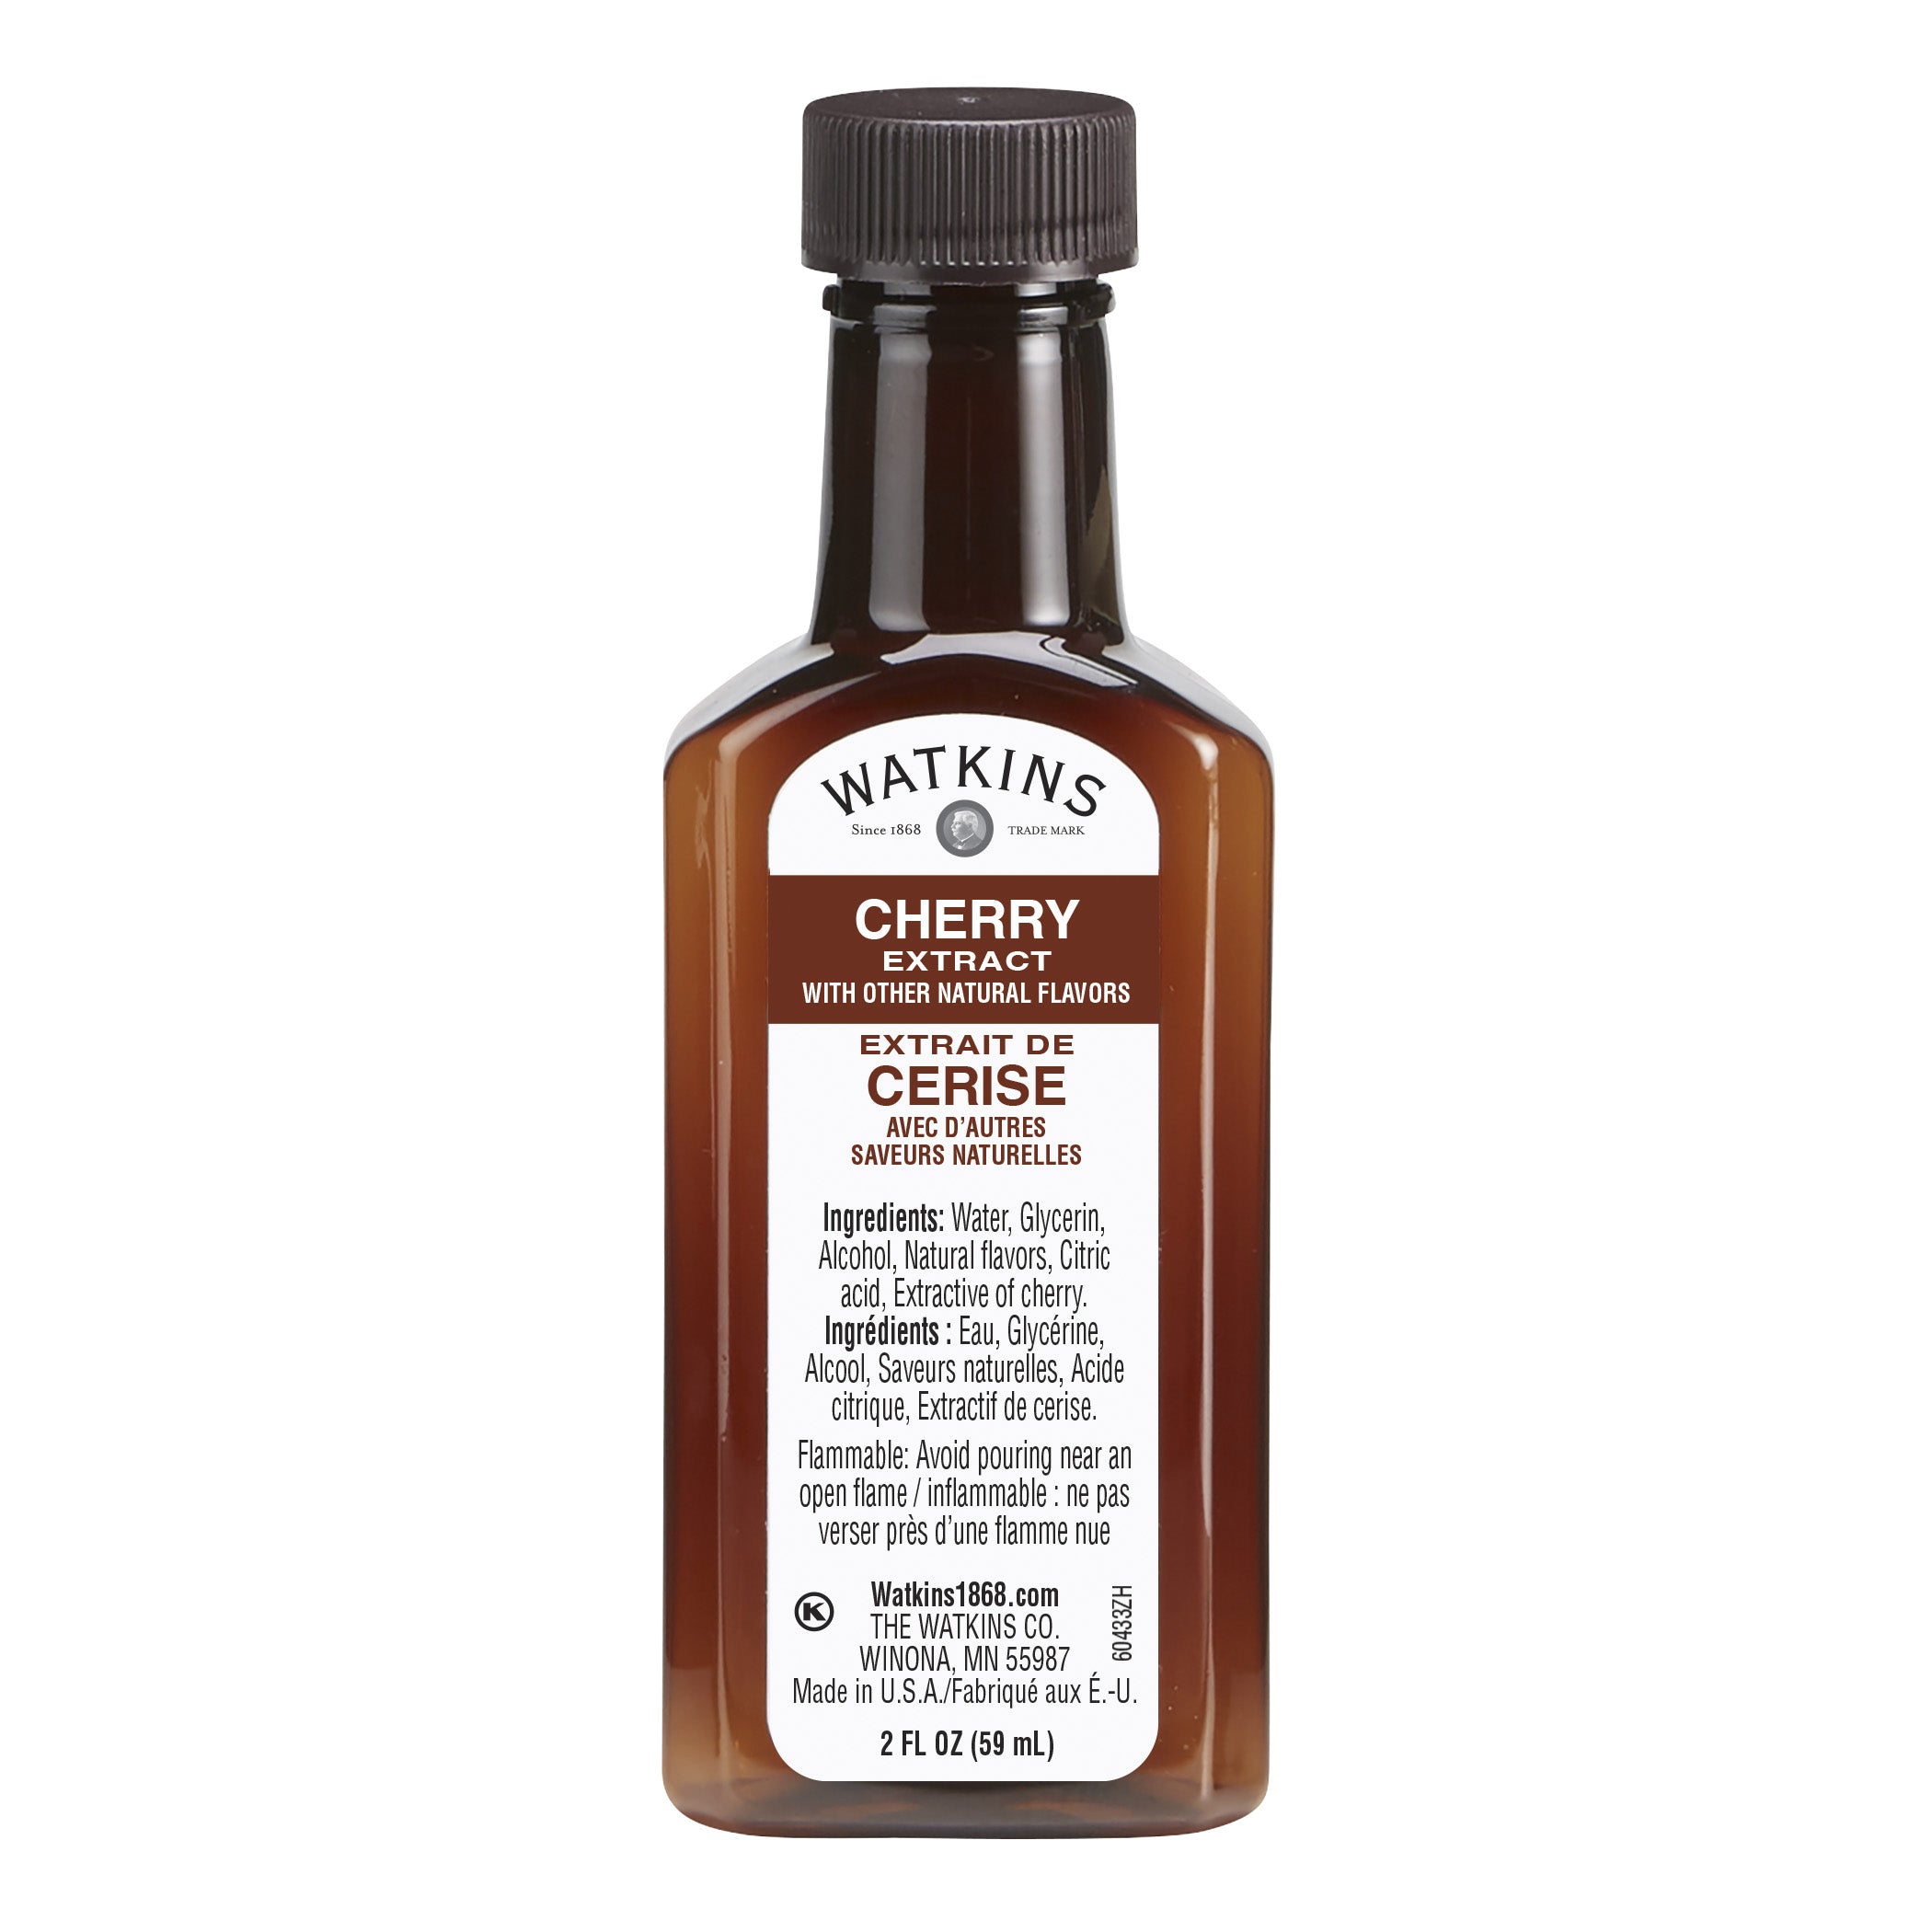 Watkins Cherry Extract with Other Natural Flavors